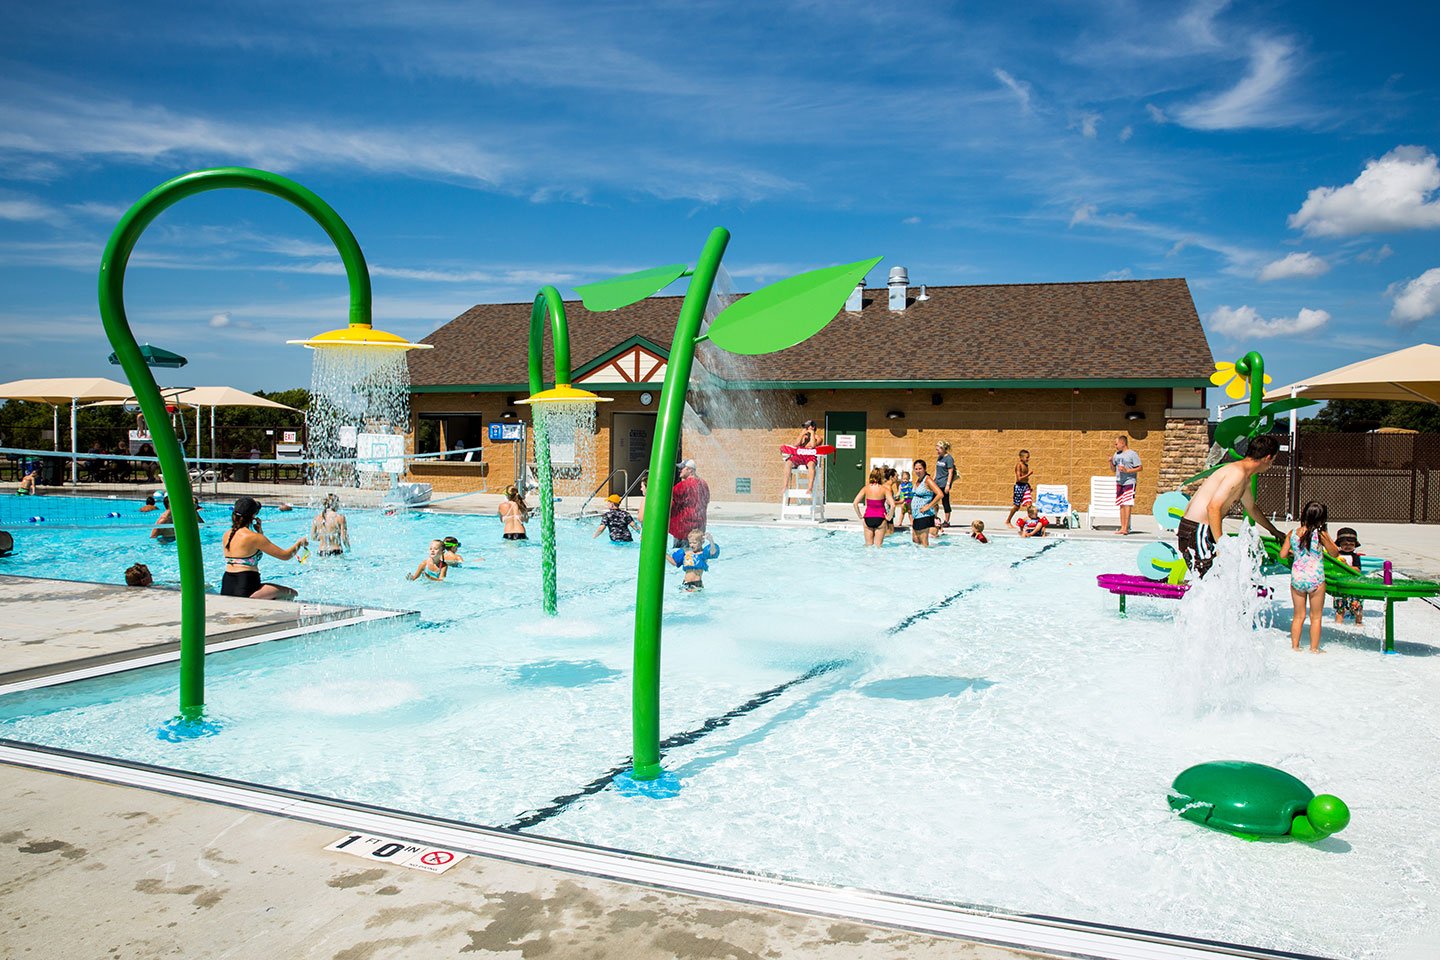 Visitors play at the Ponca State Park Aquatic Center